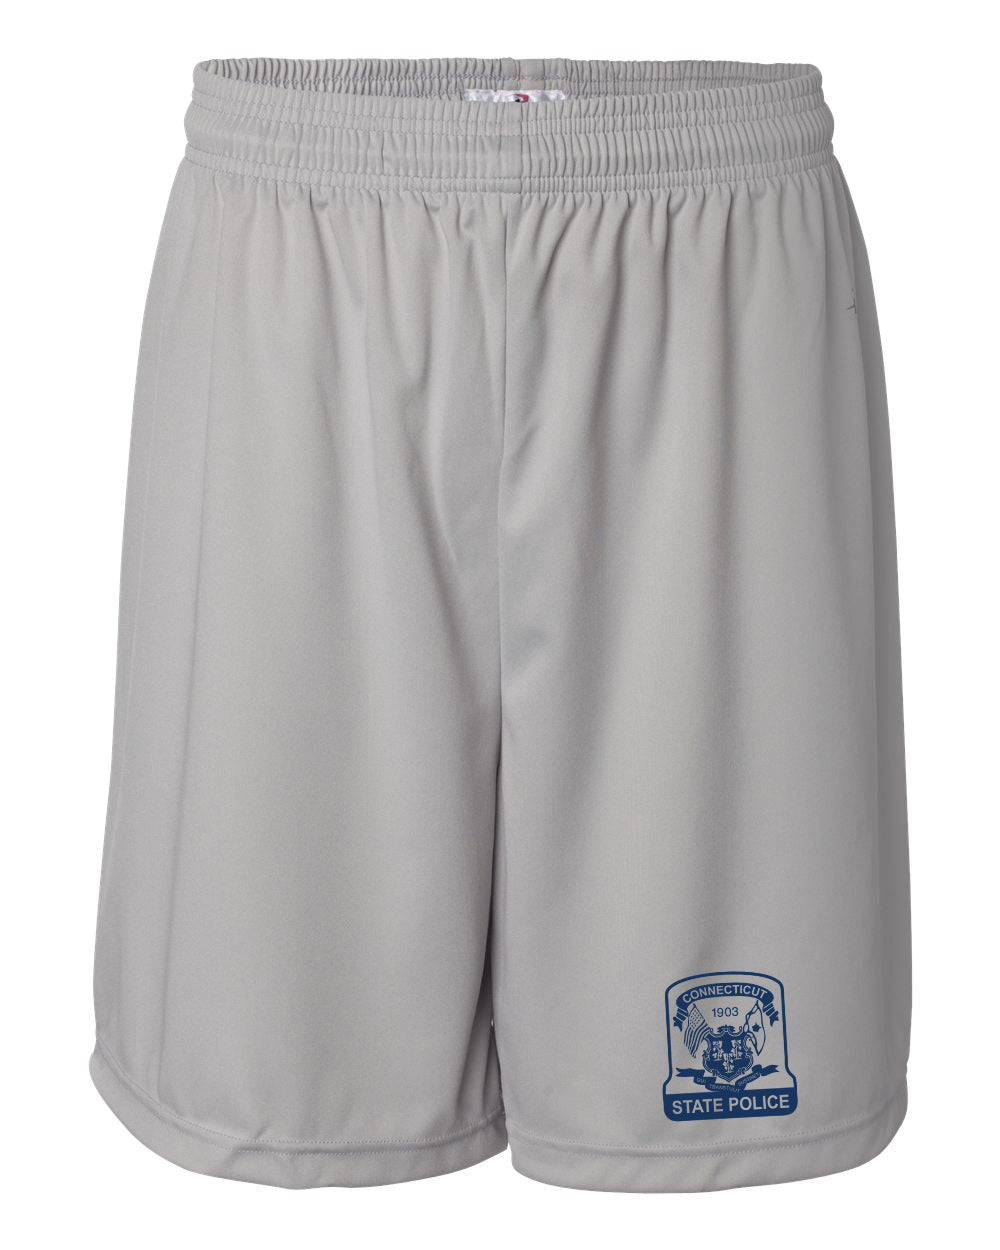 CTSP Adult Badger 7” Shorts "Shield" - 4107 (color options available)